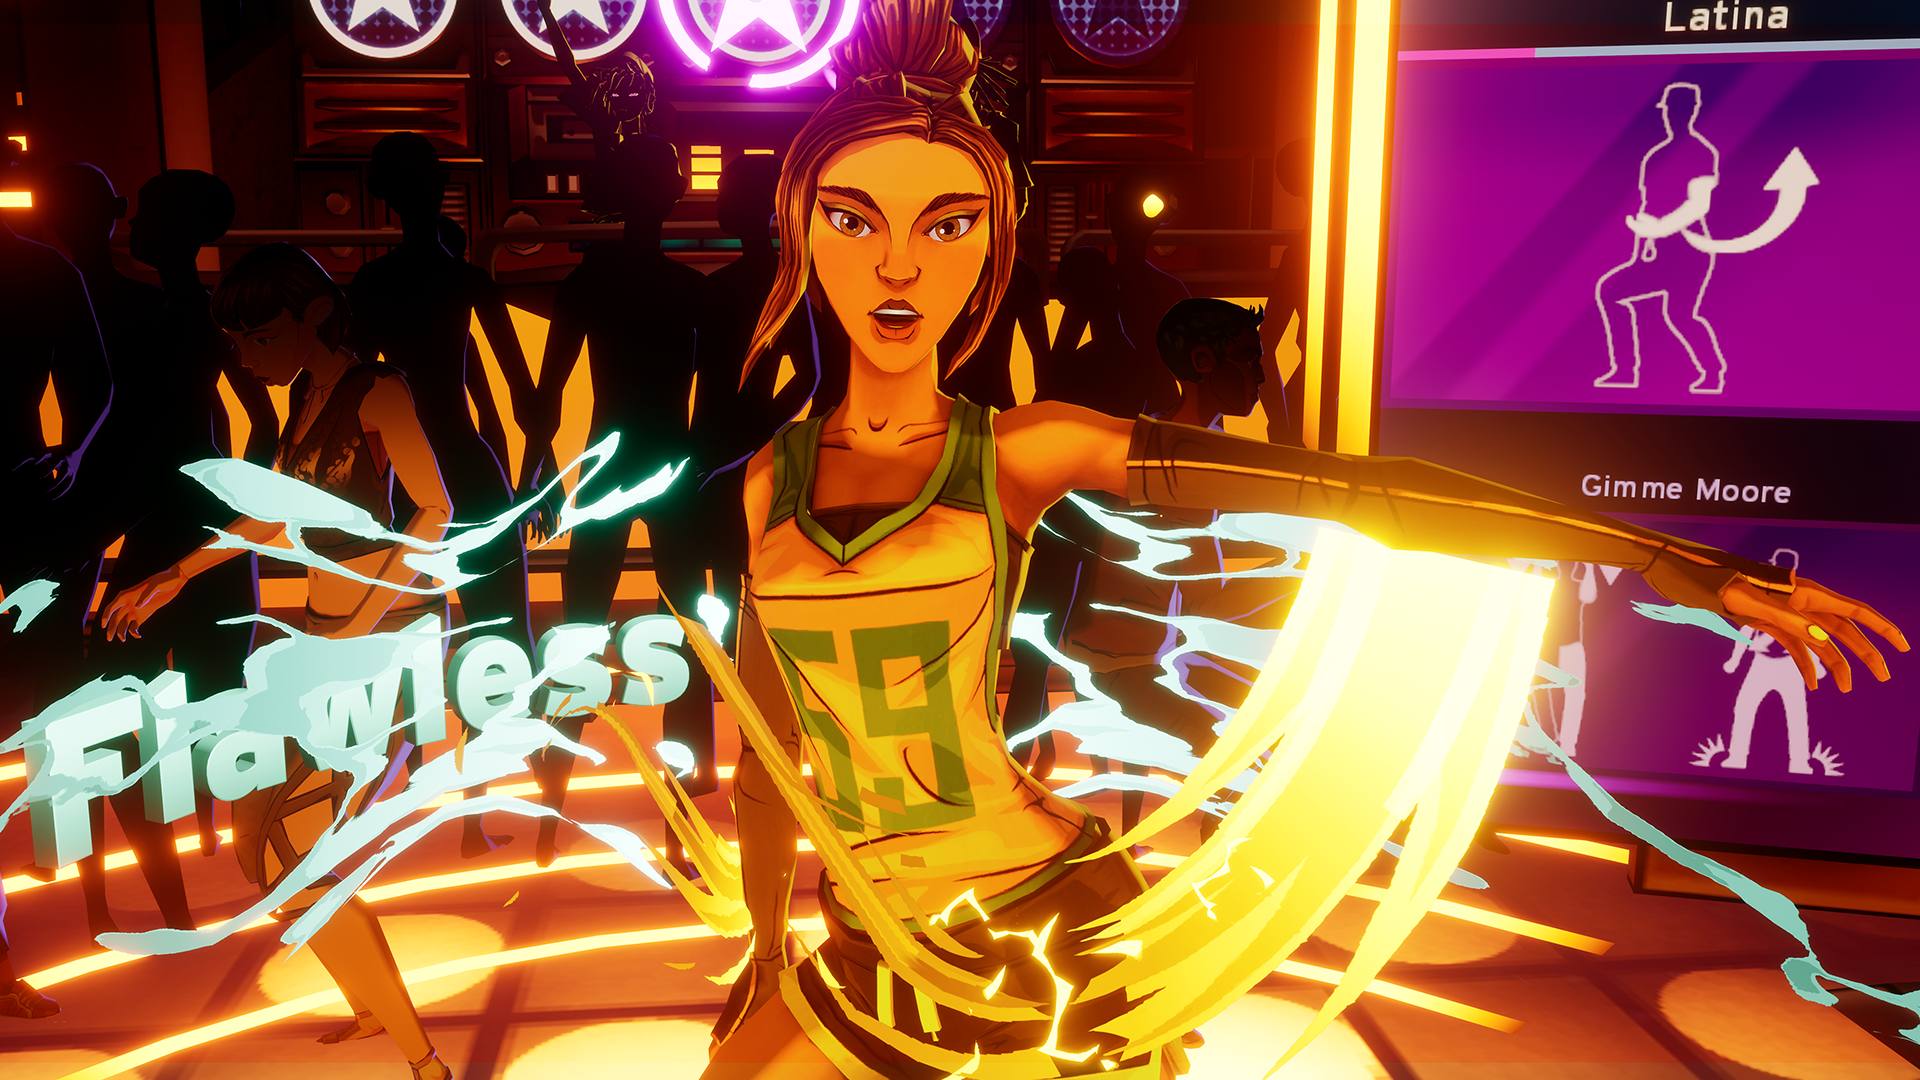 Quest 2 fitness games: A player performs a flawless dance move in Dance Central